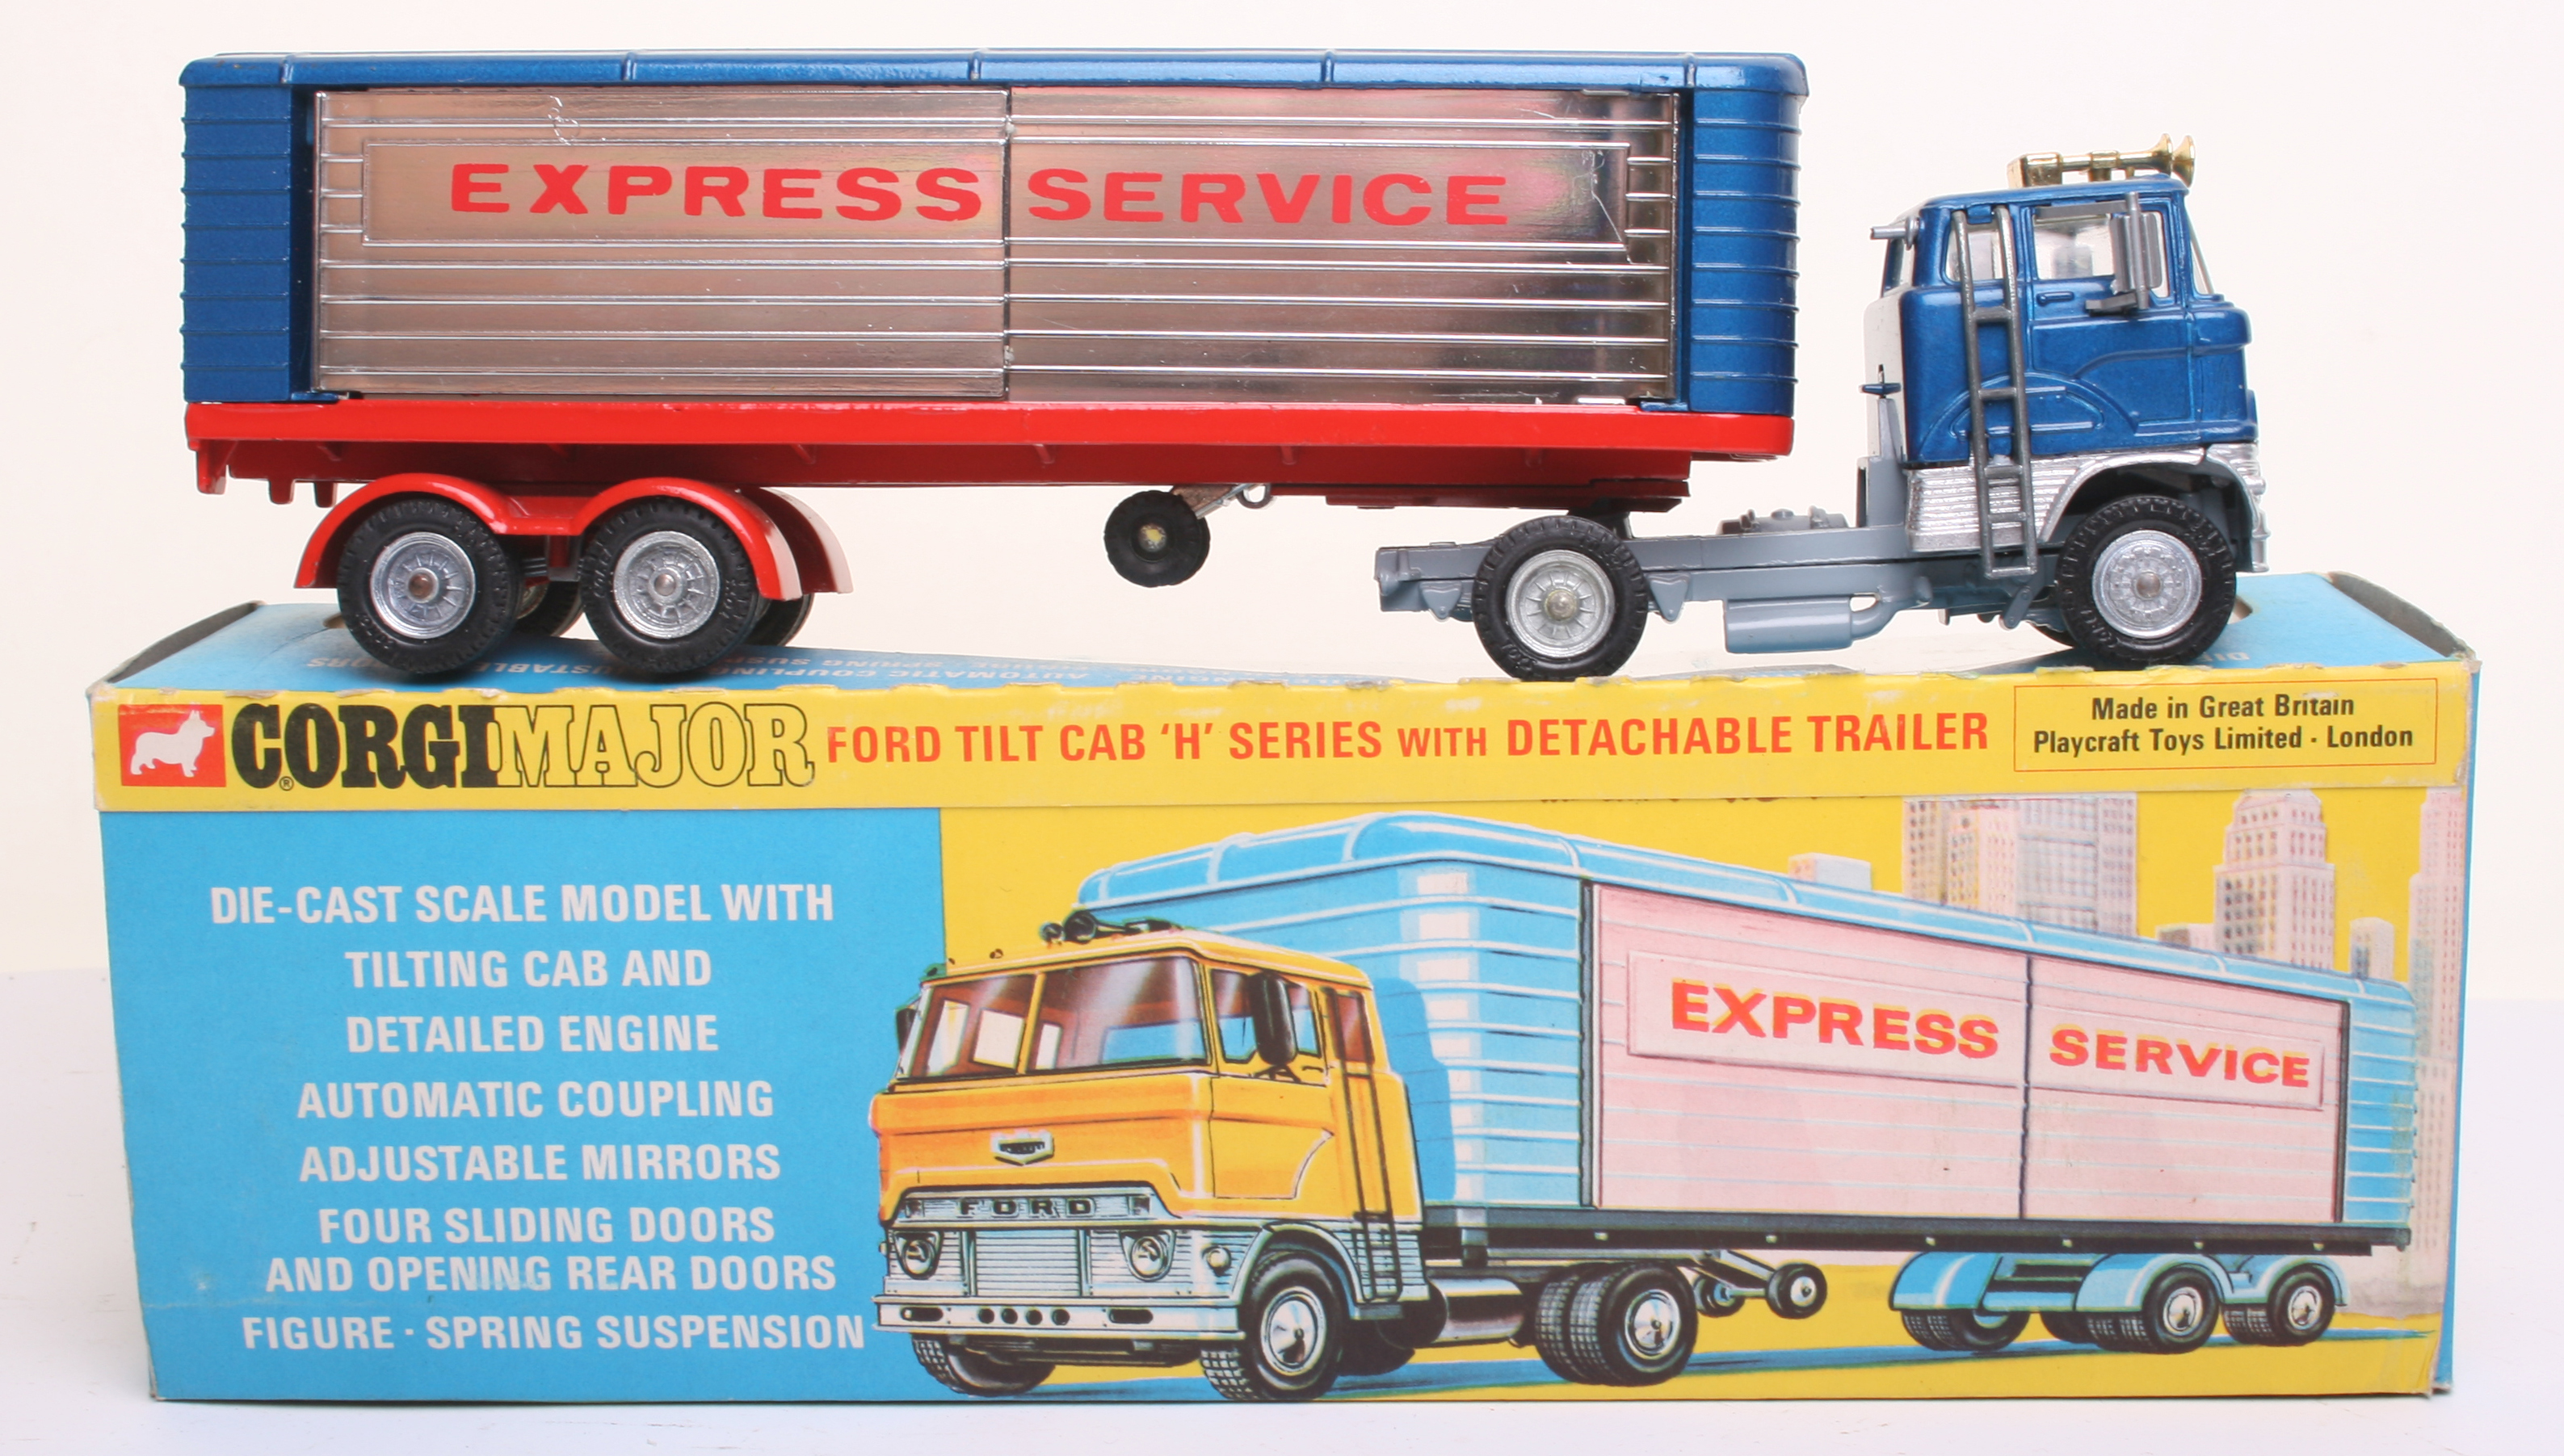 Corgi Major Toys 1137 Ford Articulated Truck “ Express Service” metallic blue/red/silver body, - Image 3 of 3